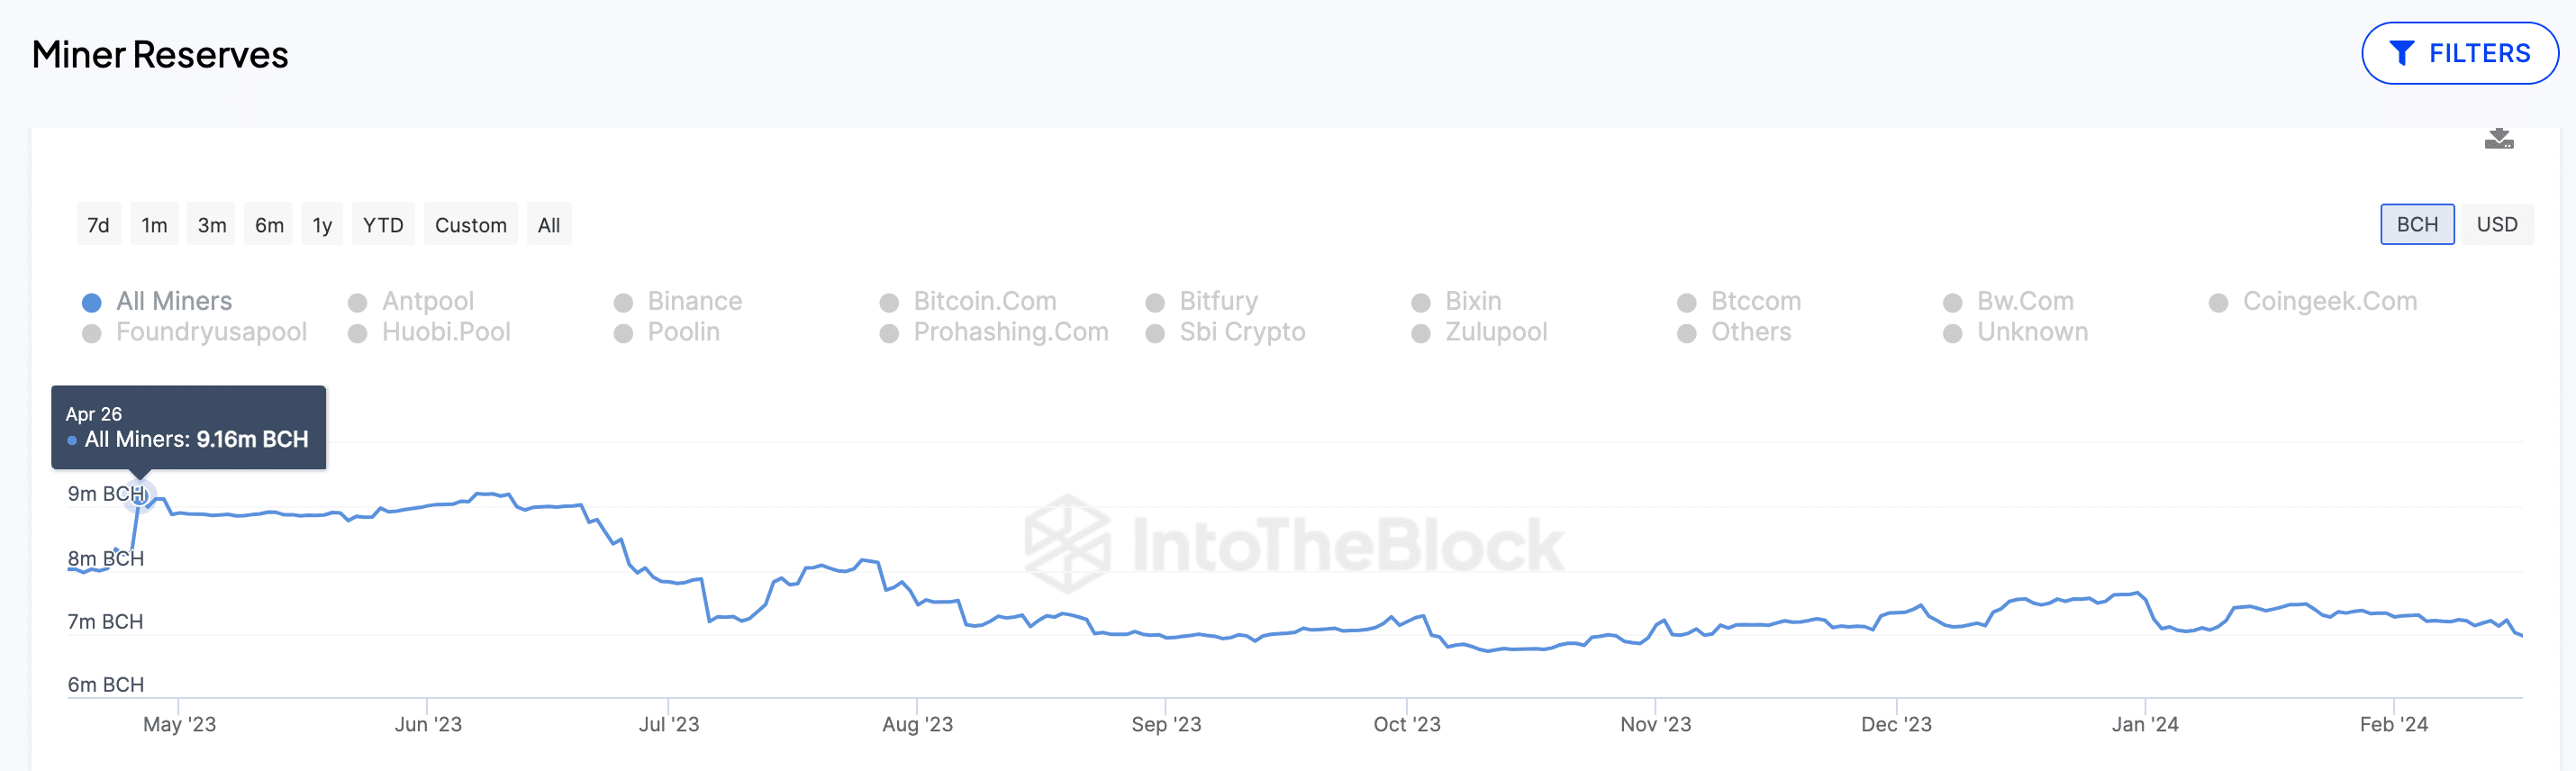 Bitcoin Cash (BCH) Miners Reserves